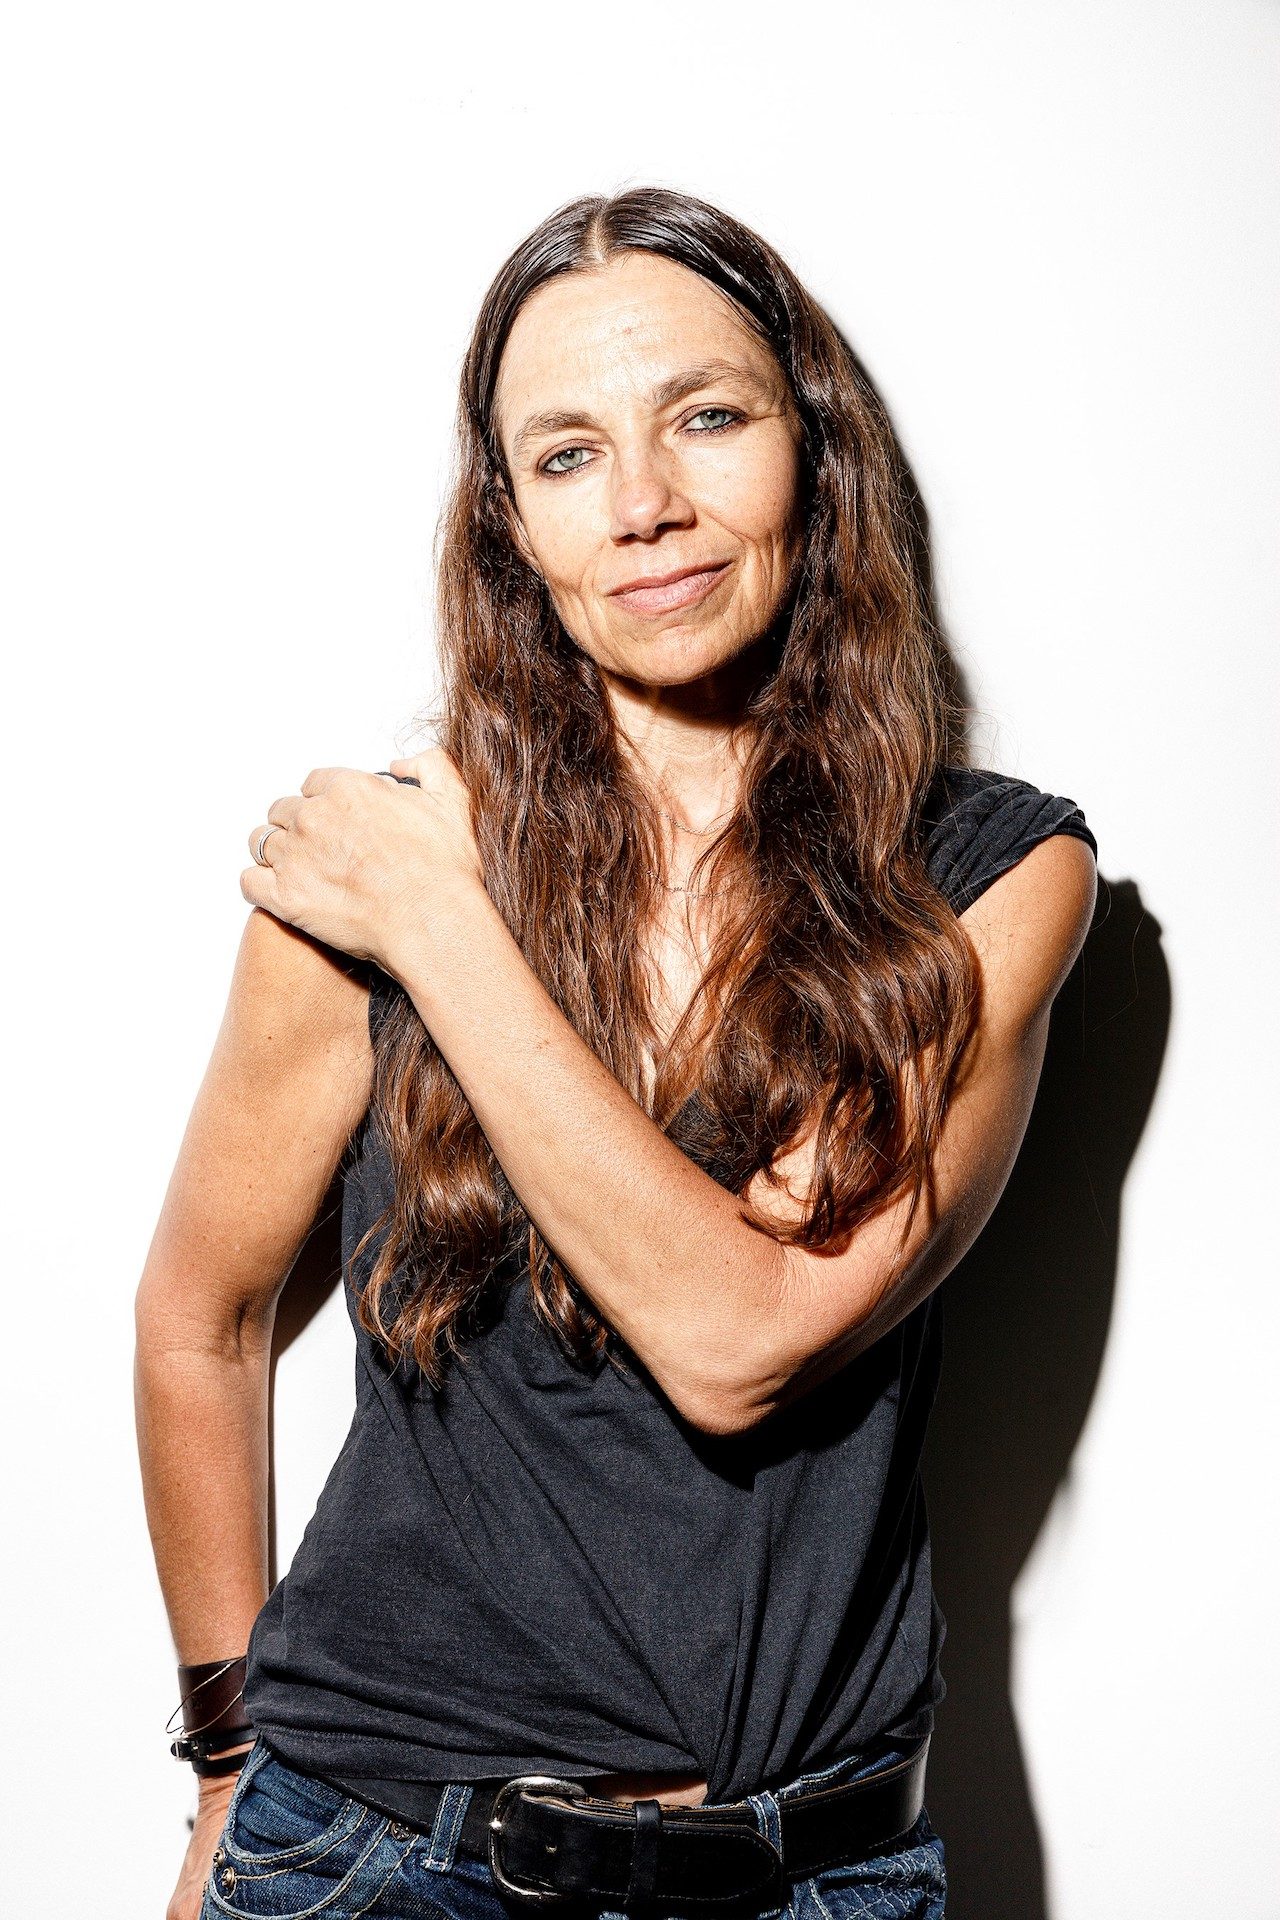 [Only IN Hollywood] Justine Bateman dares you to age naturally, confidently